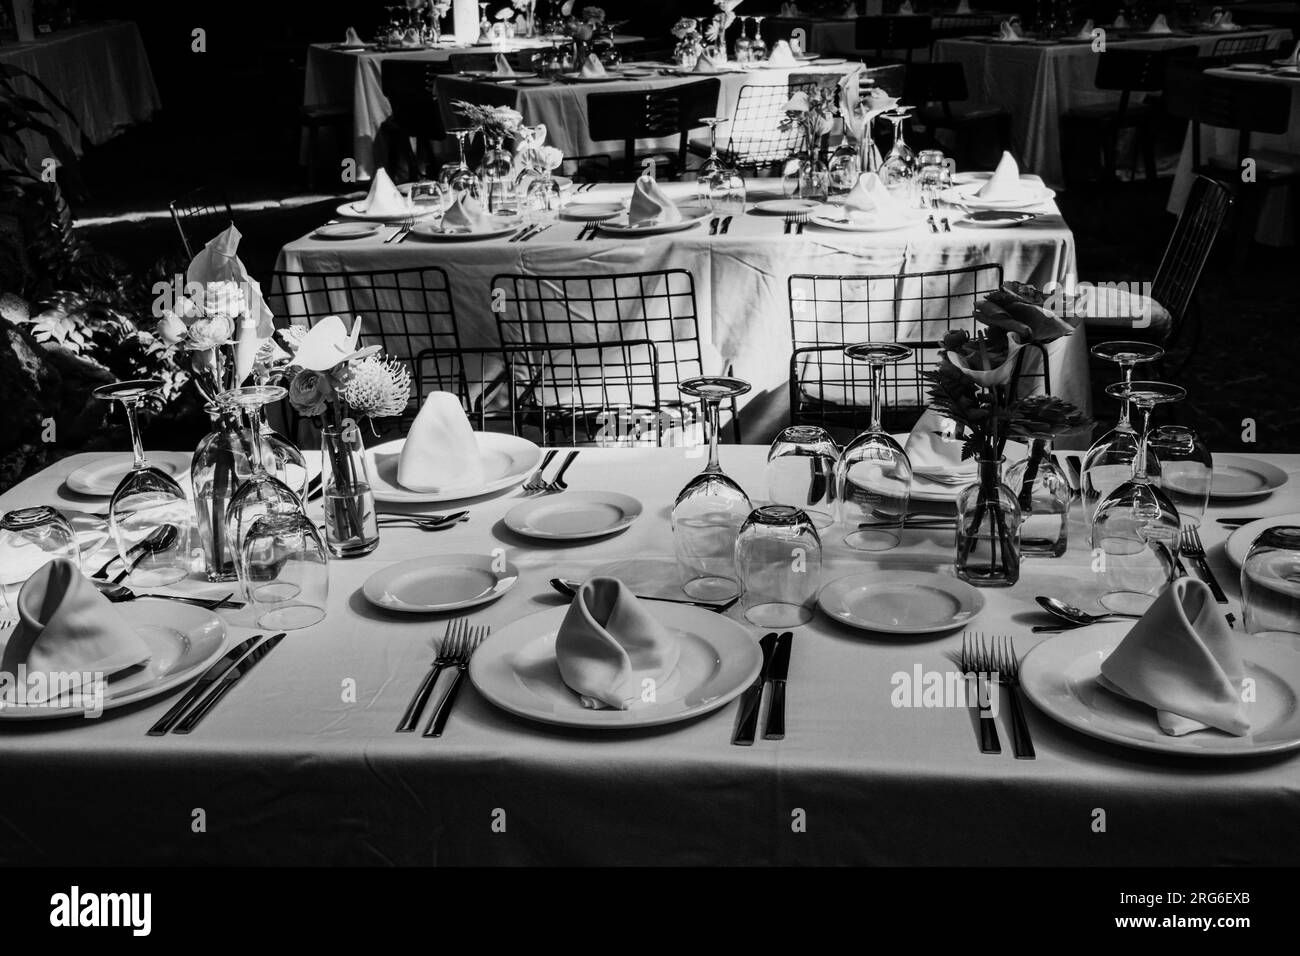 Beautifully laid tables with glasses, cutlery and crockery prepared for a great celebration. Black and white photography. Stock Photo